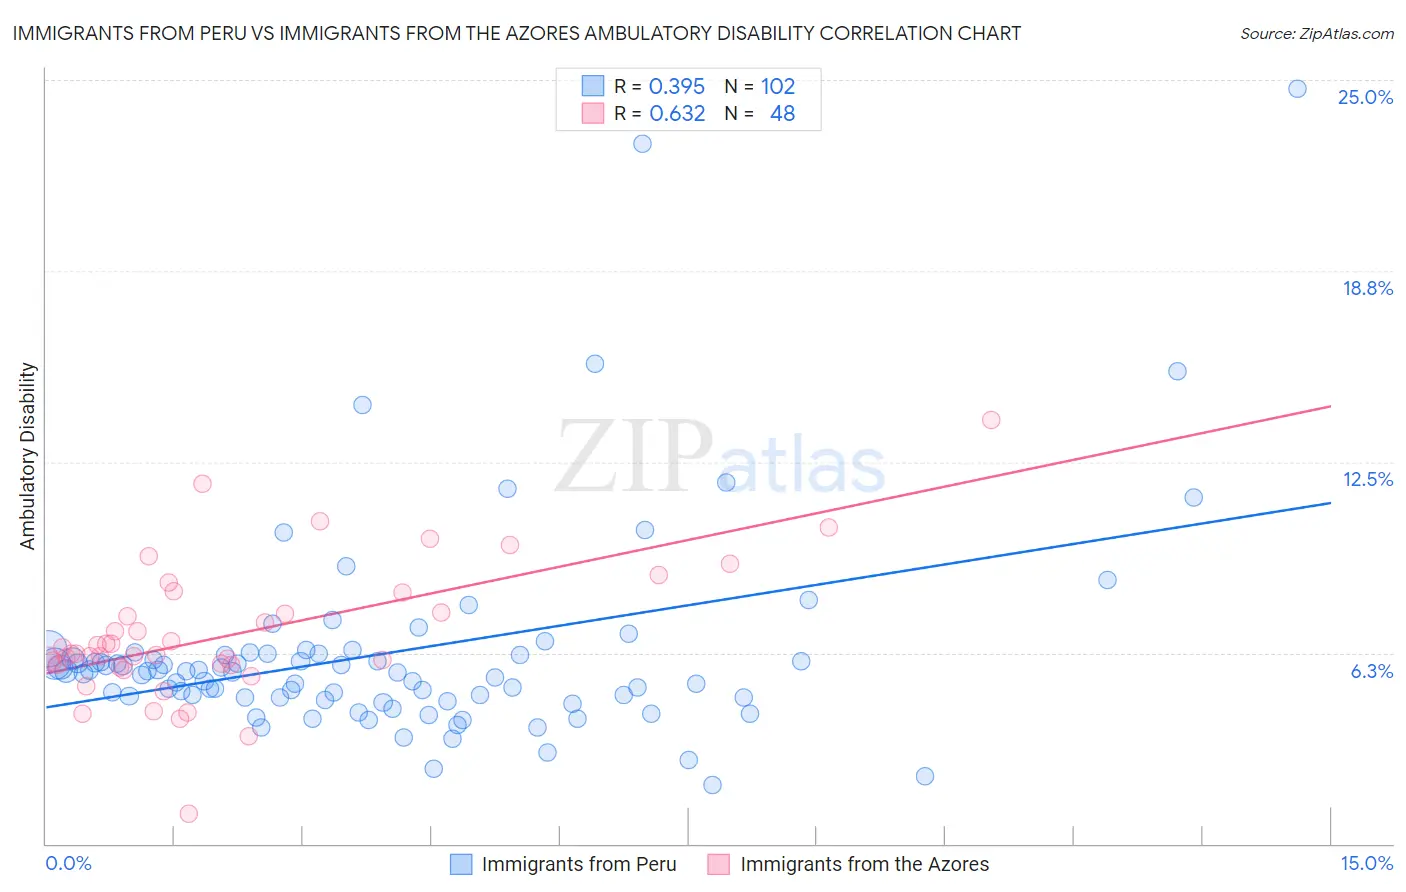 Immigrants from Peru vs Immigrants from the Azores Ambulatory Disability